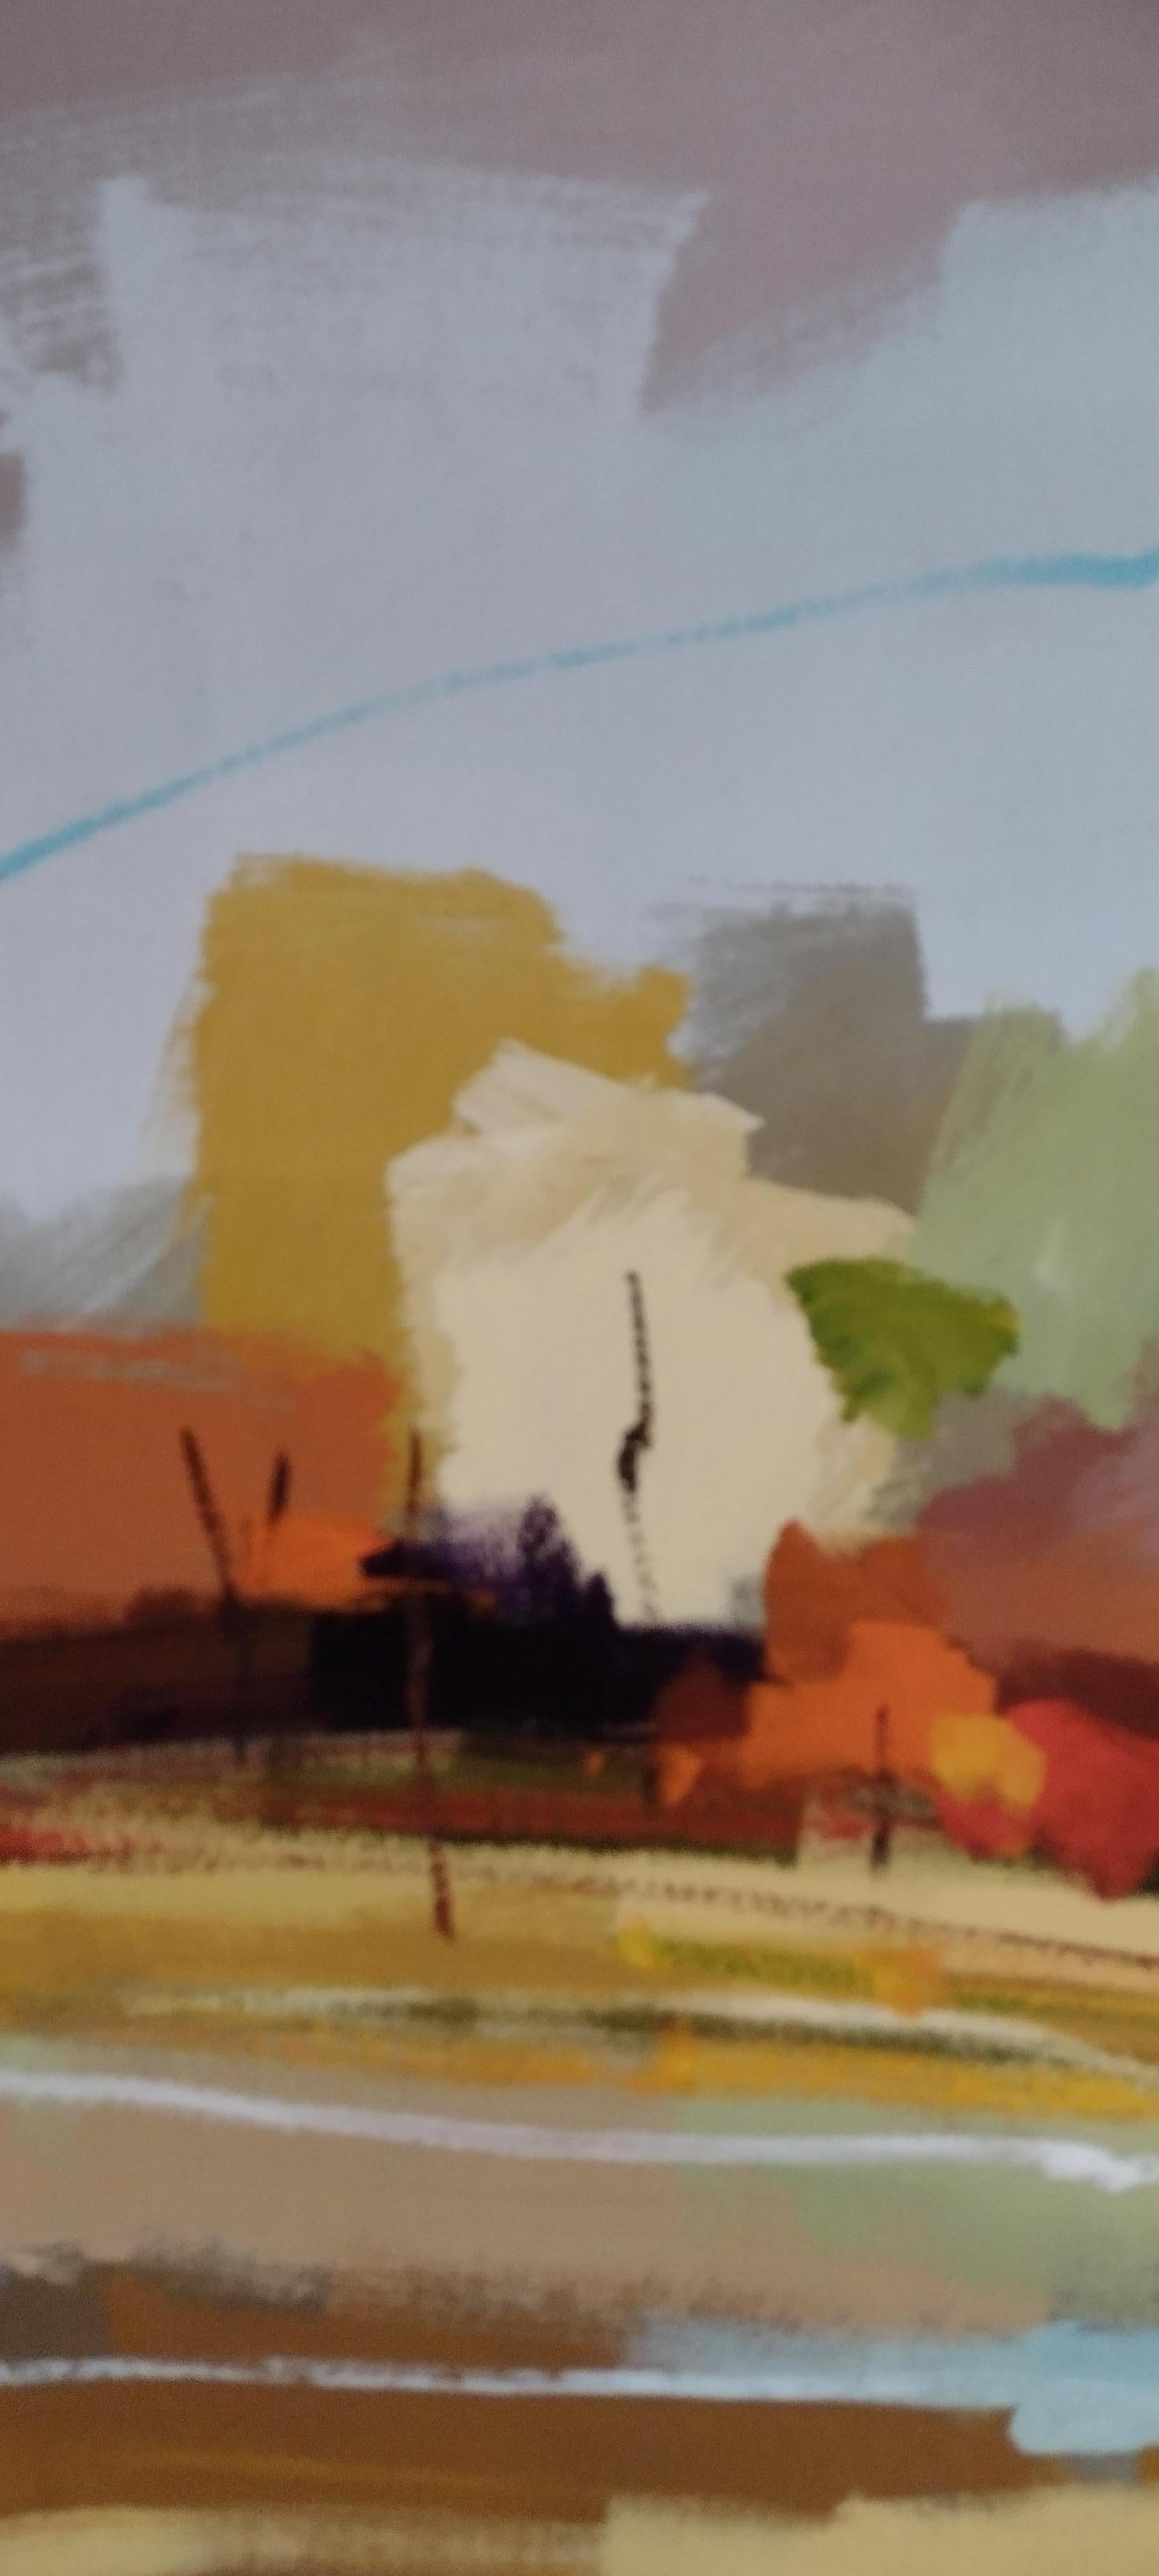 Collective Fondness I - Original Acrylic Landscape on Paper - Contemporary Painting by Lun Tse 